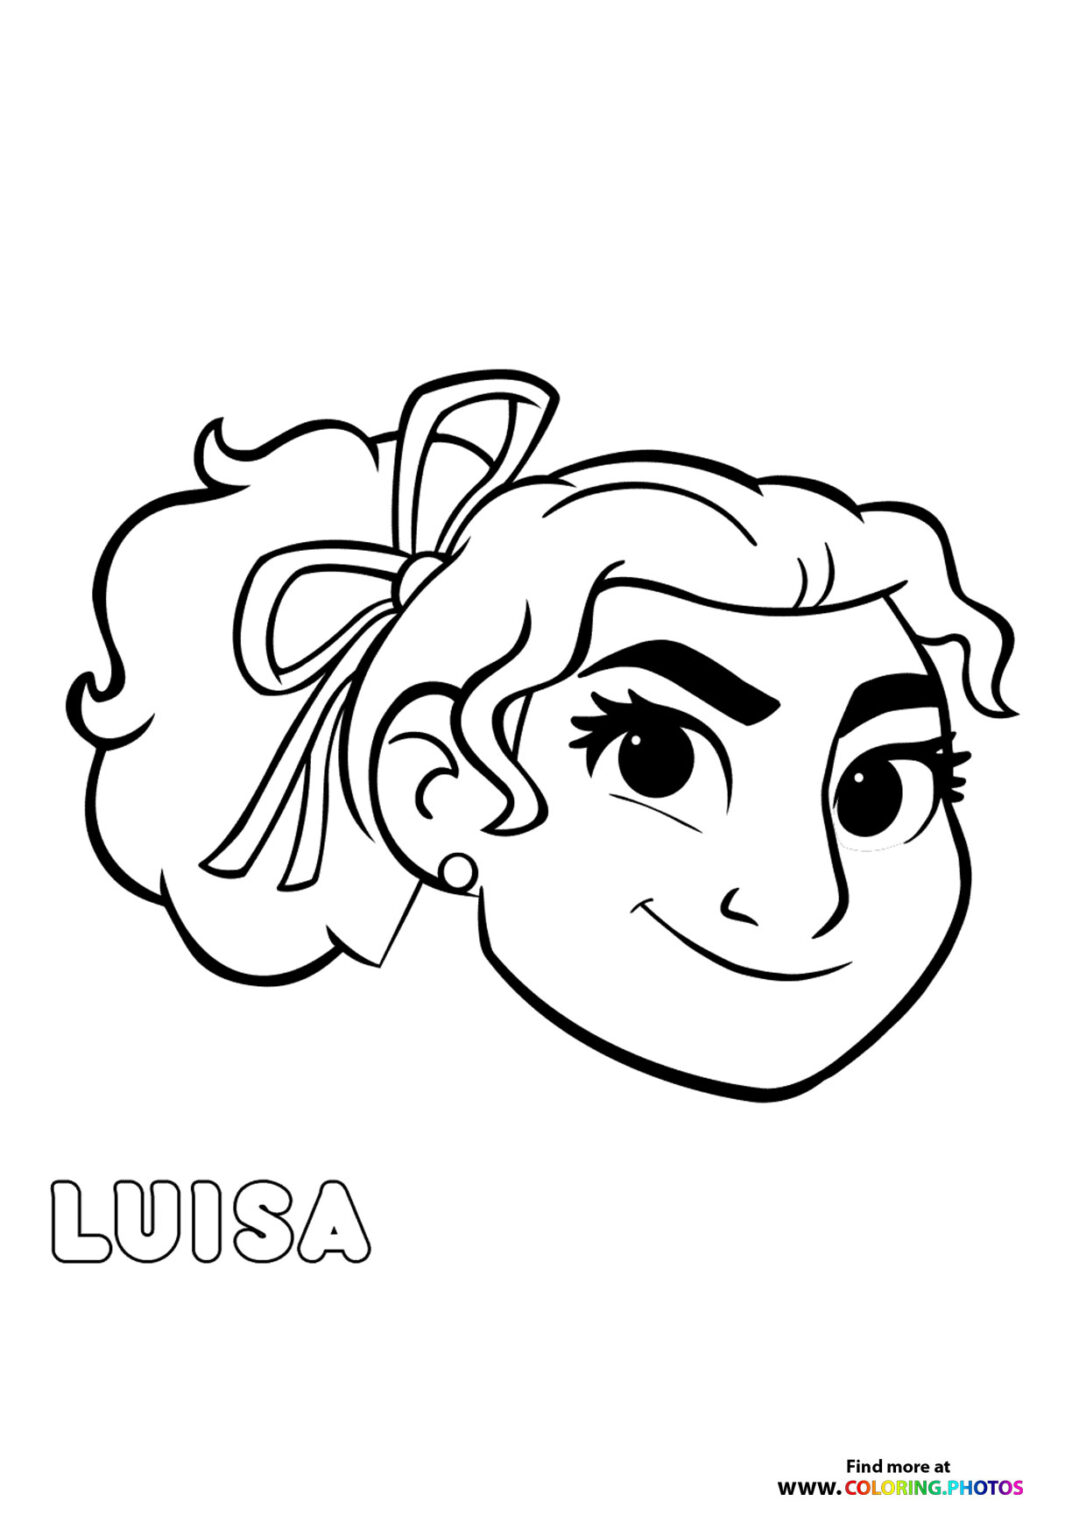 Encanto Luisa - Coloring Pages for kids